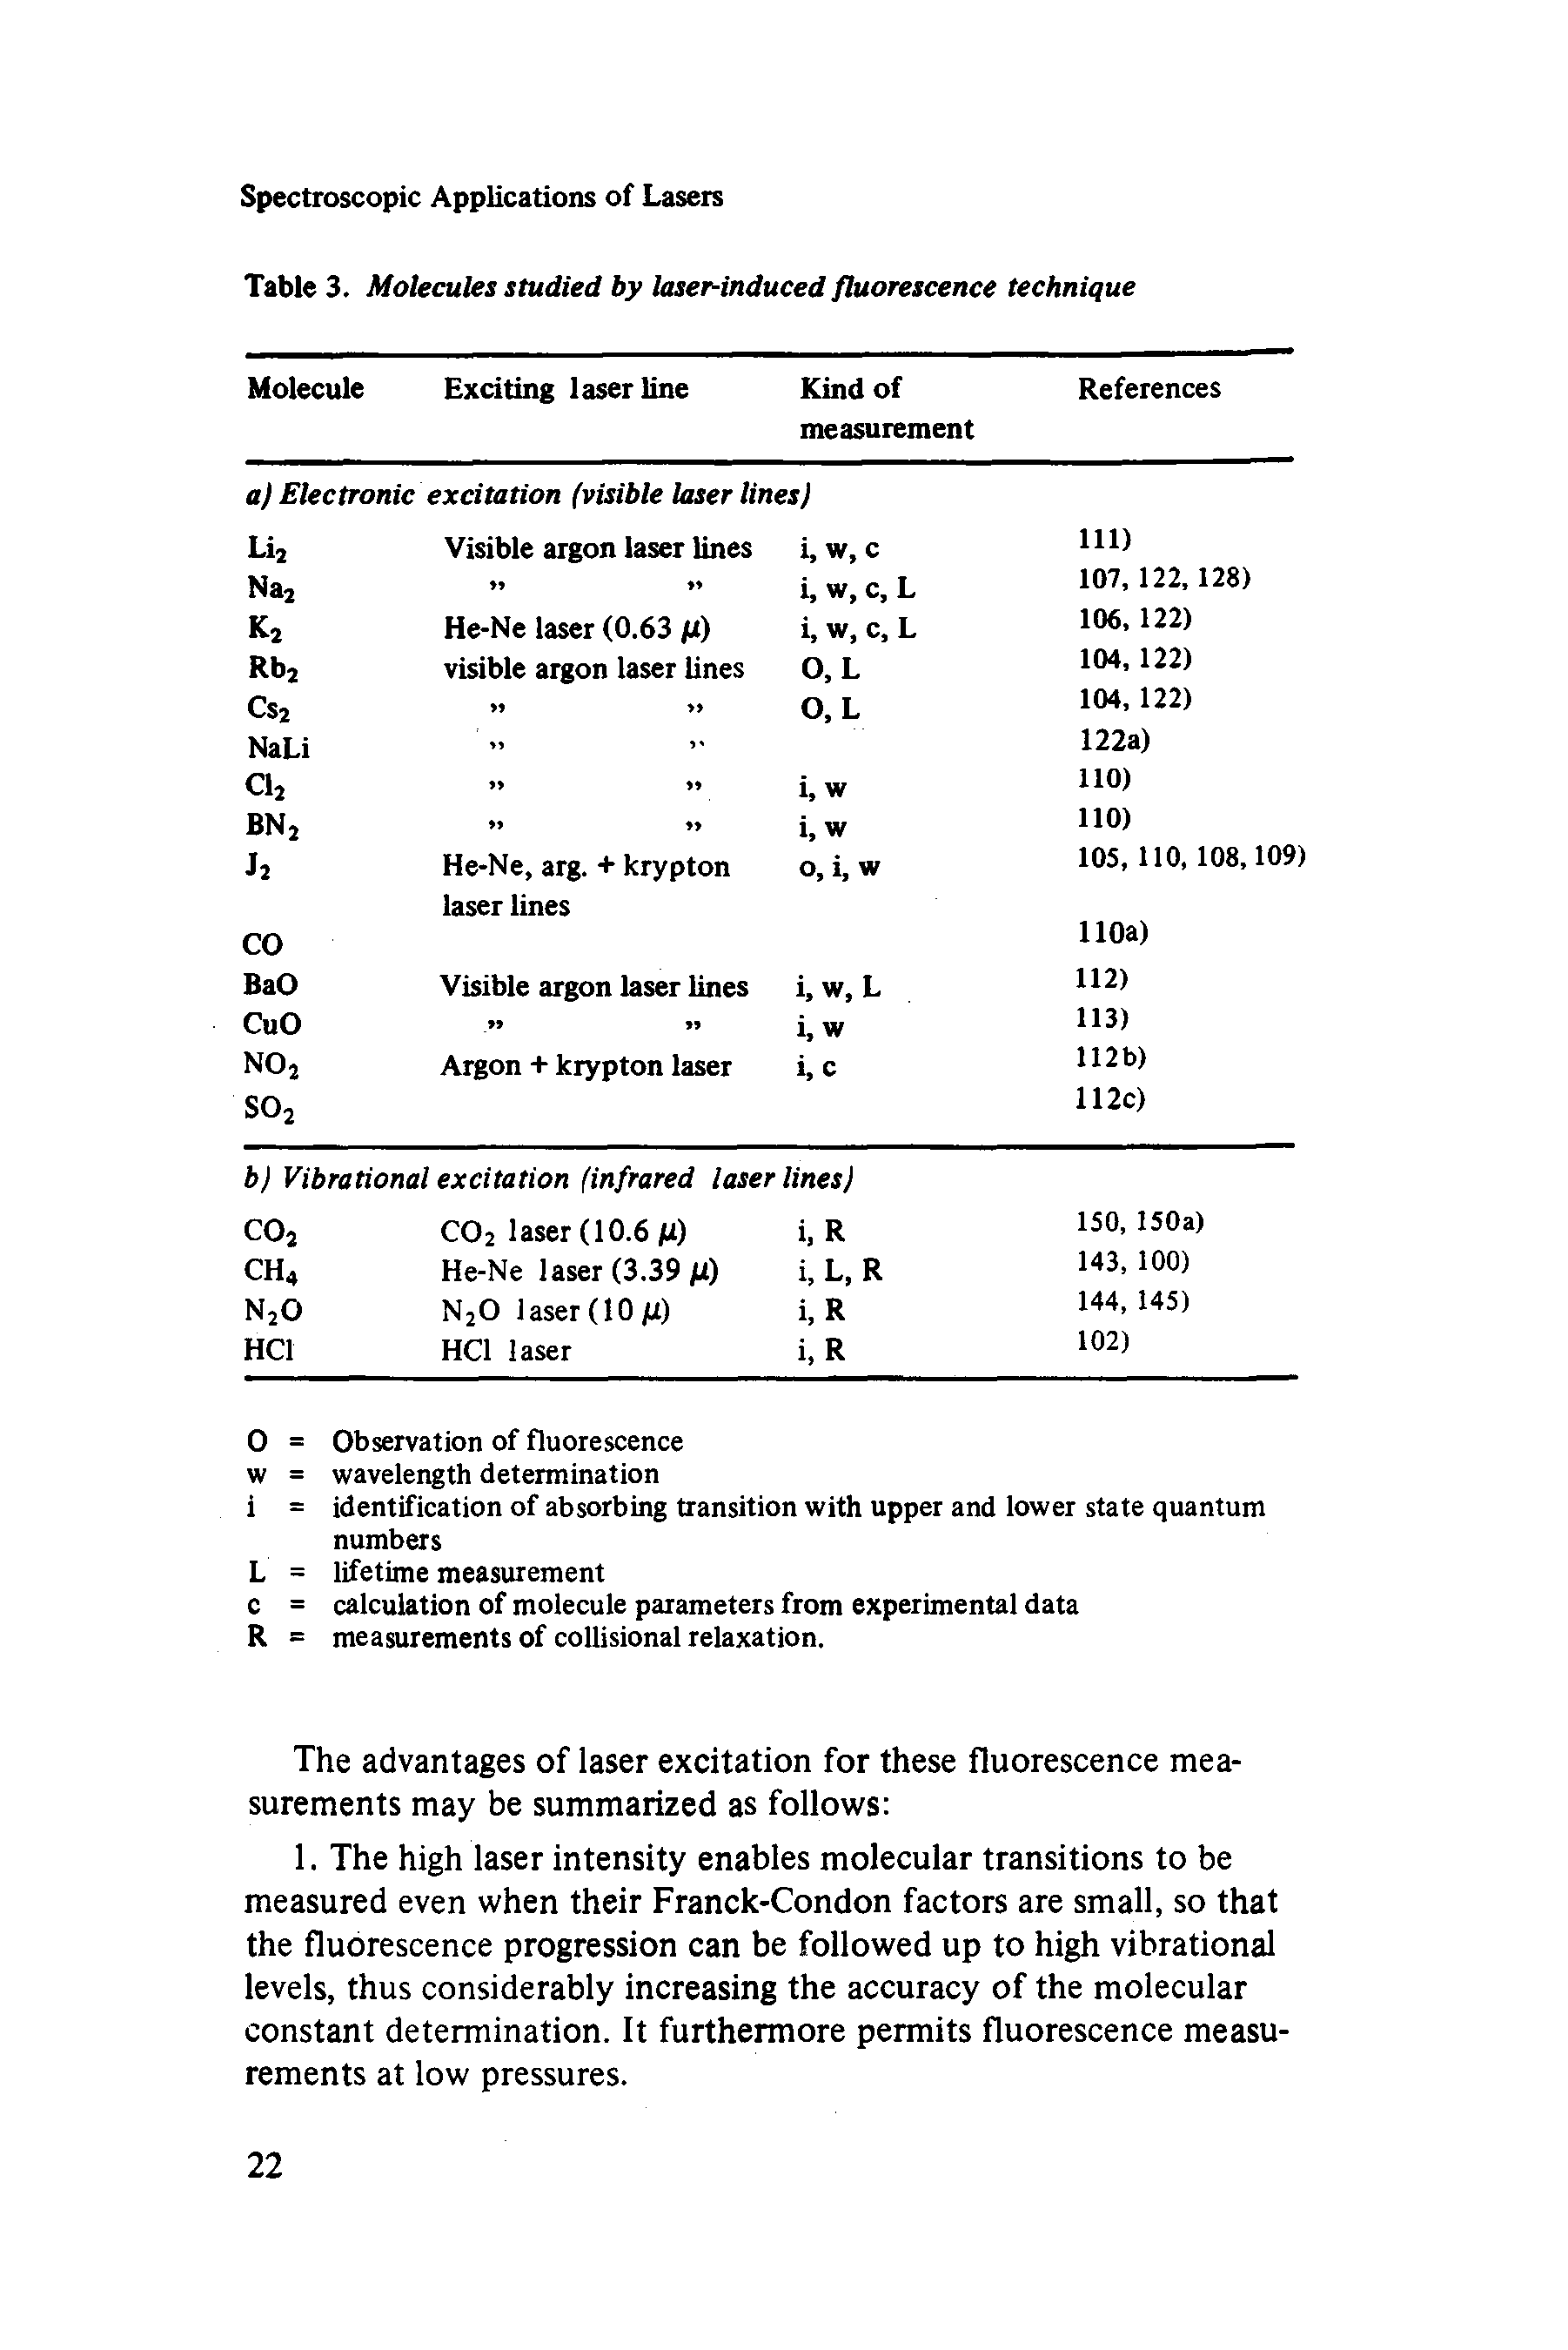 Table 3. Molecules studied by laser-induced fluorescence technique...